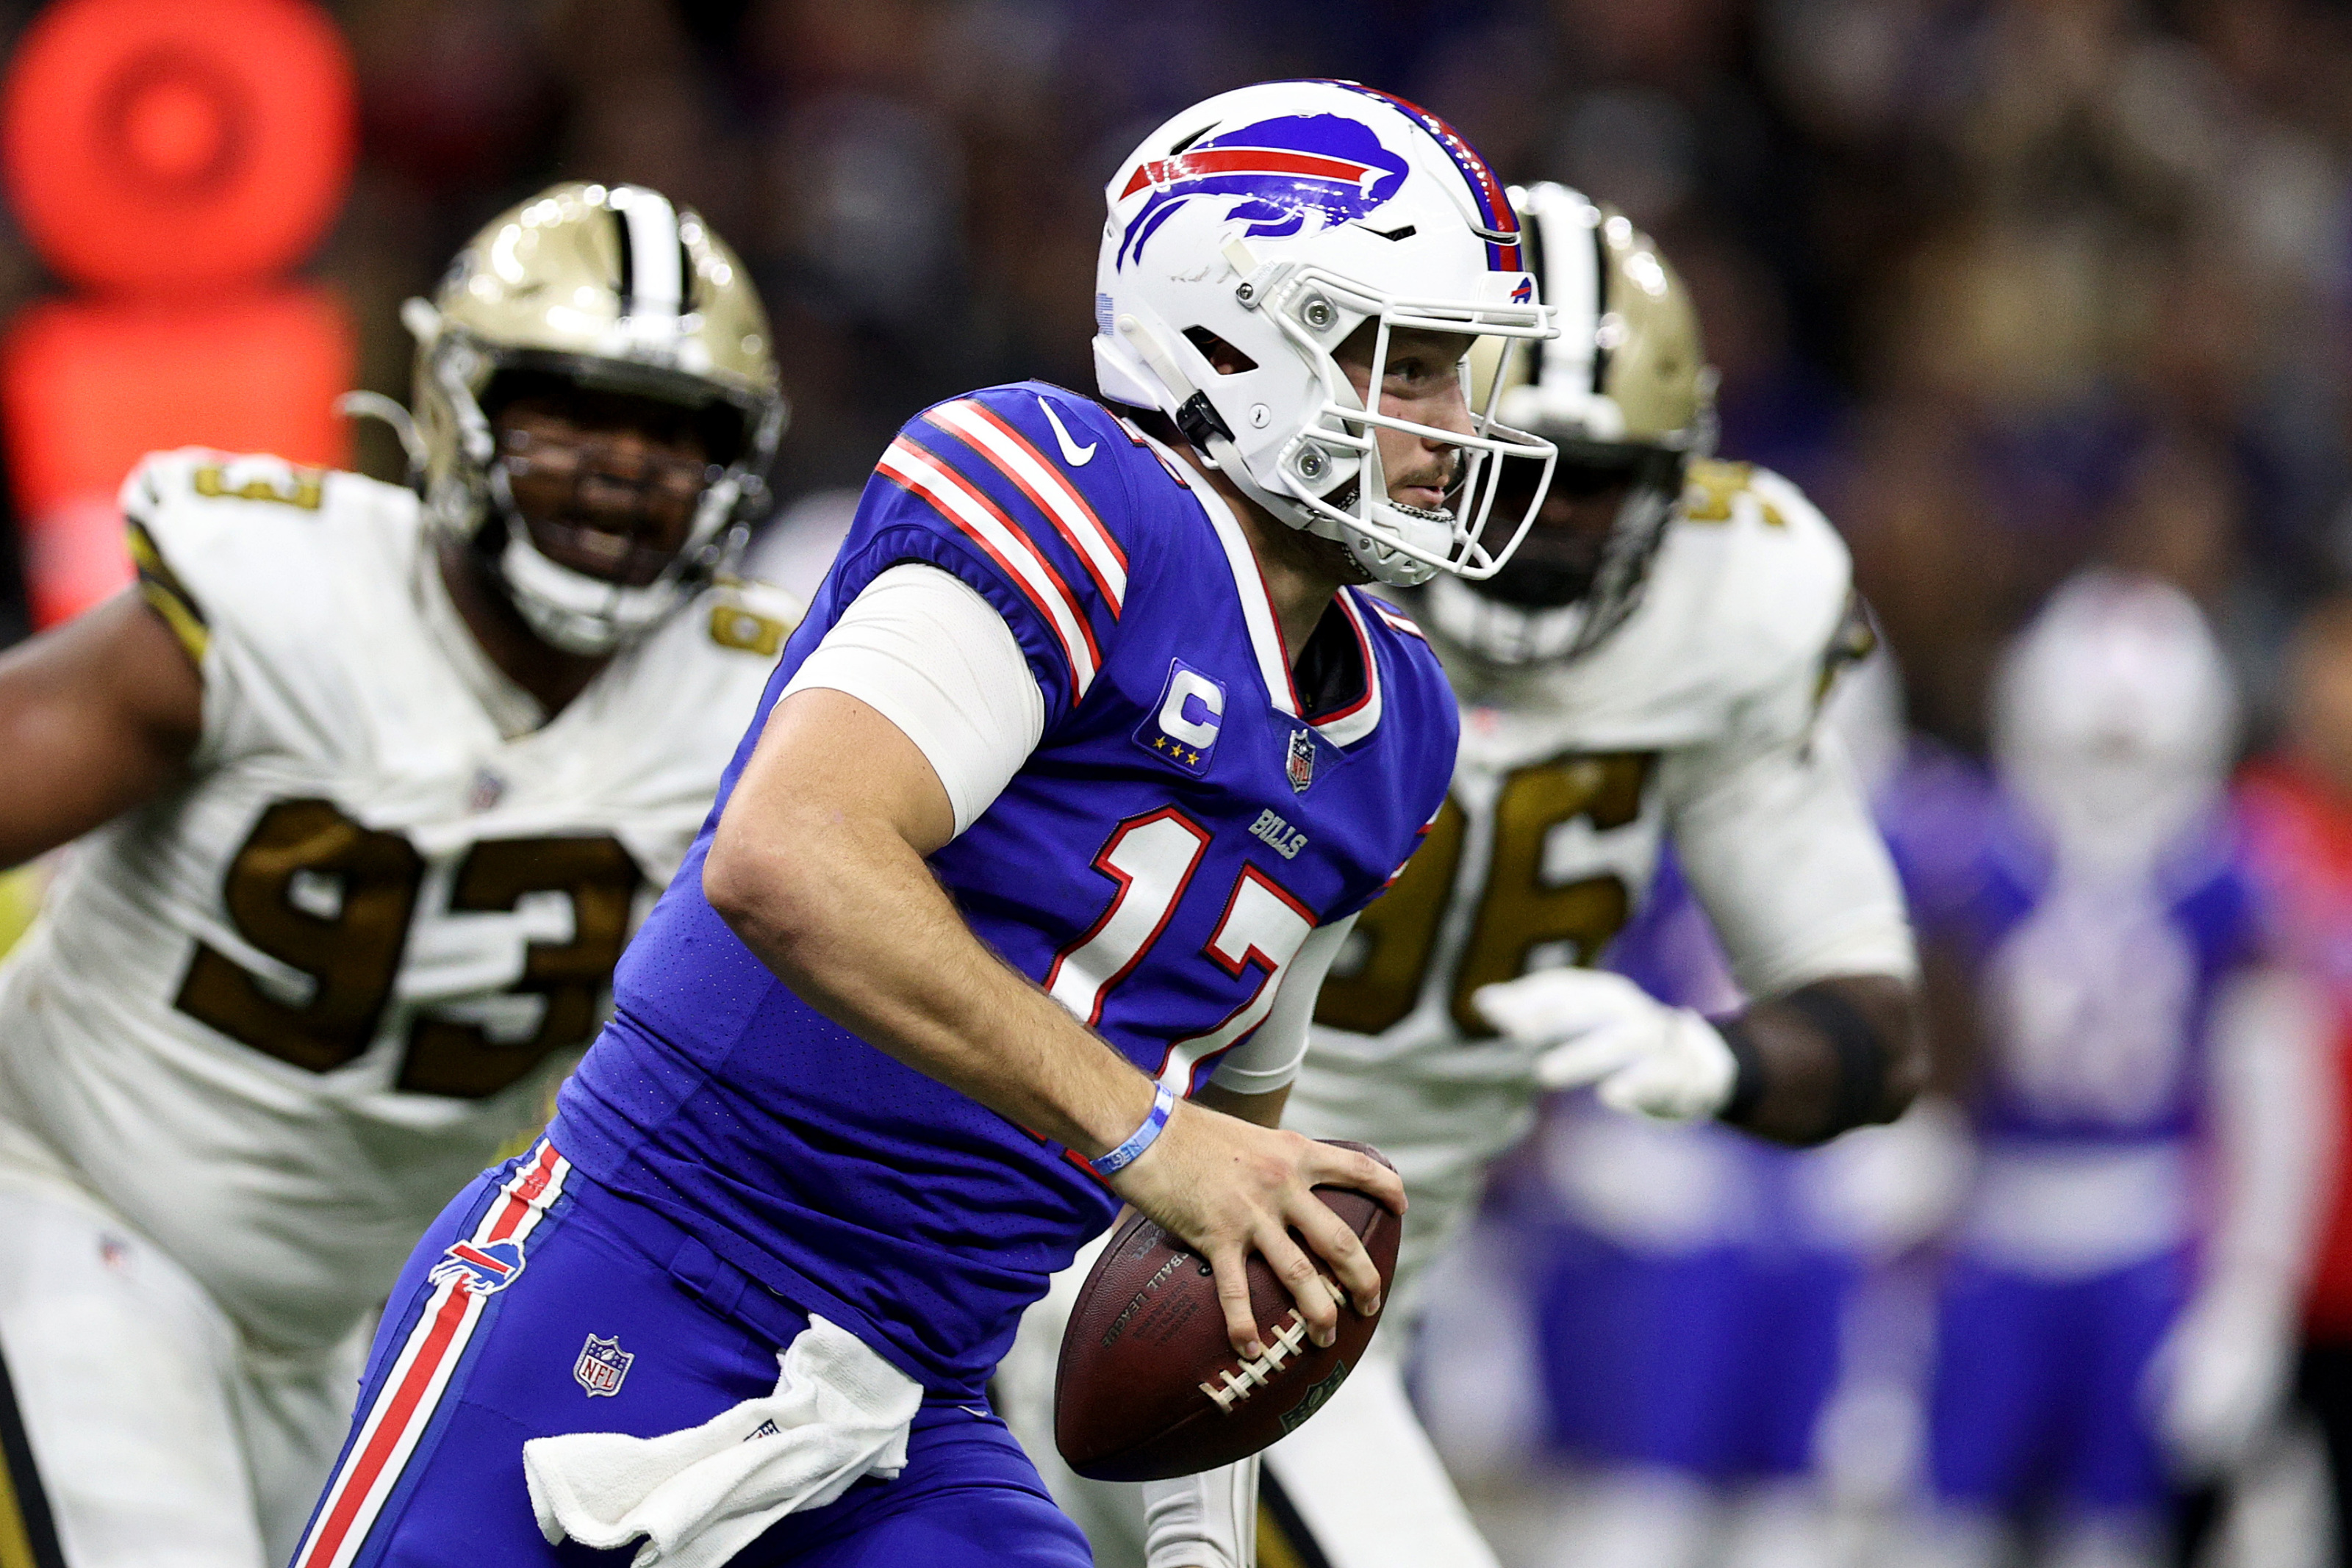 Buffalo Bills: A feast in the Big Easy to get back on track